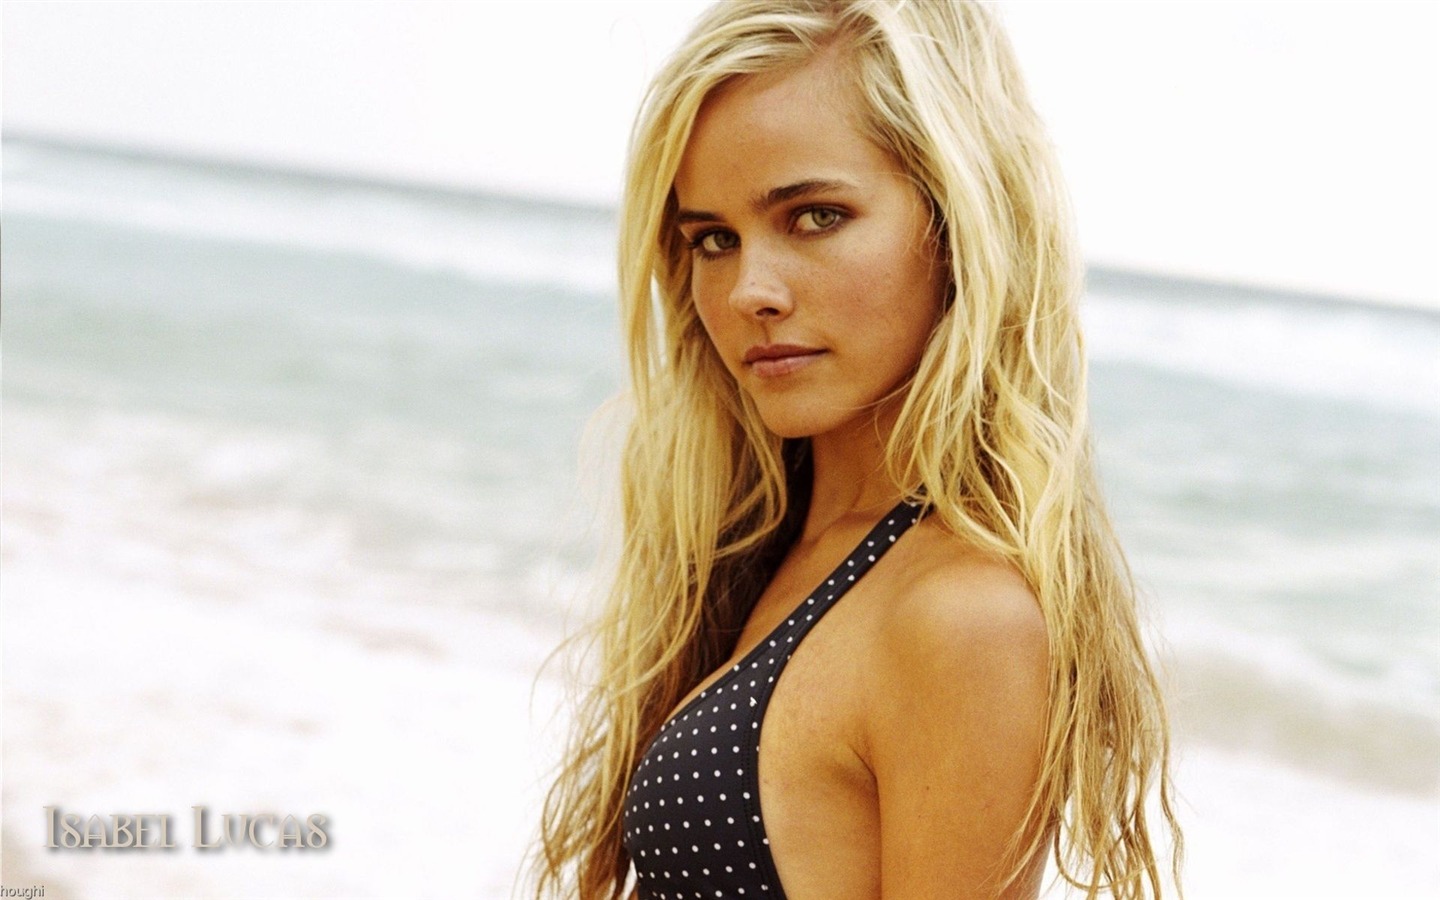 Isabel Lucas #001 - 1440x900 Wallpapers Pictures Photos Images